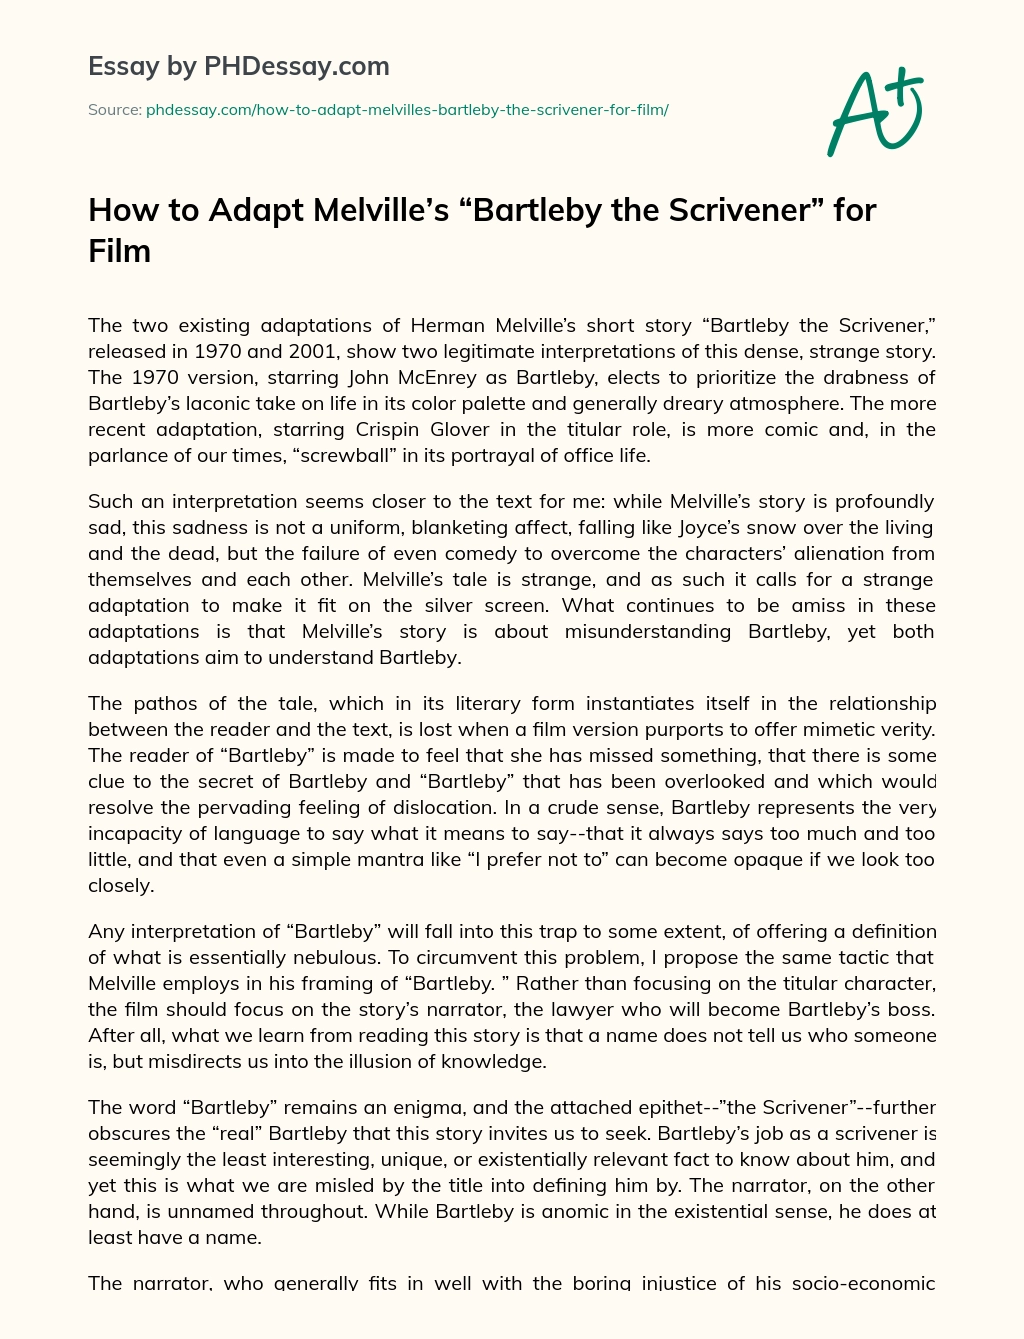 How to Adapt Melville’s “Bartleby the Scrivener” for Film essay